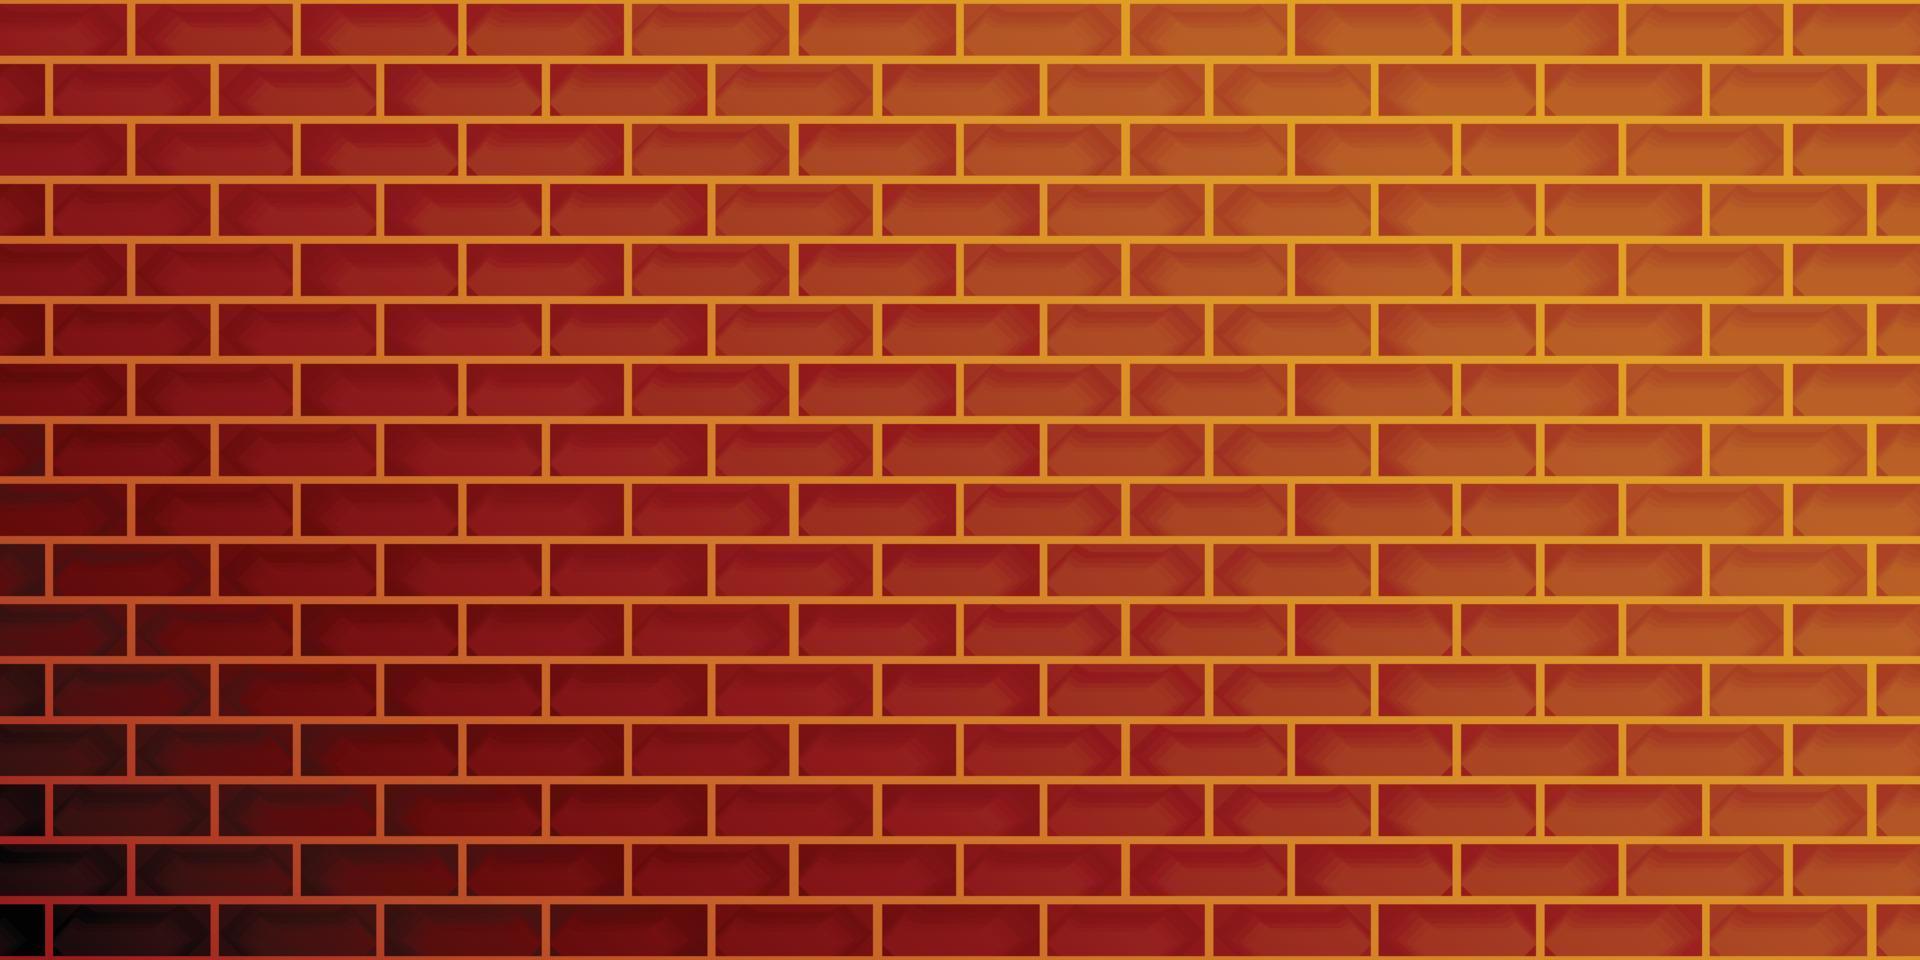 Brick wall light shiny abstract background brown color texture wallpaper backdrop pattern seamless vector illustration